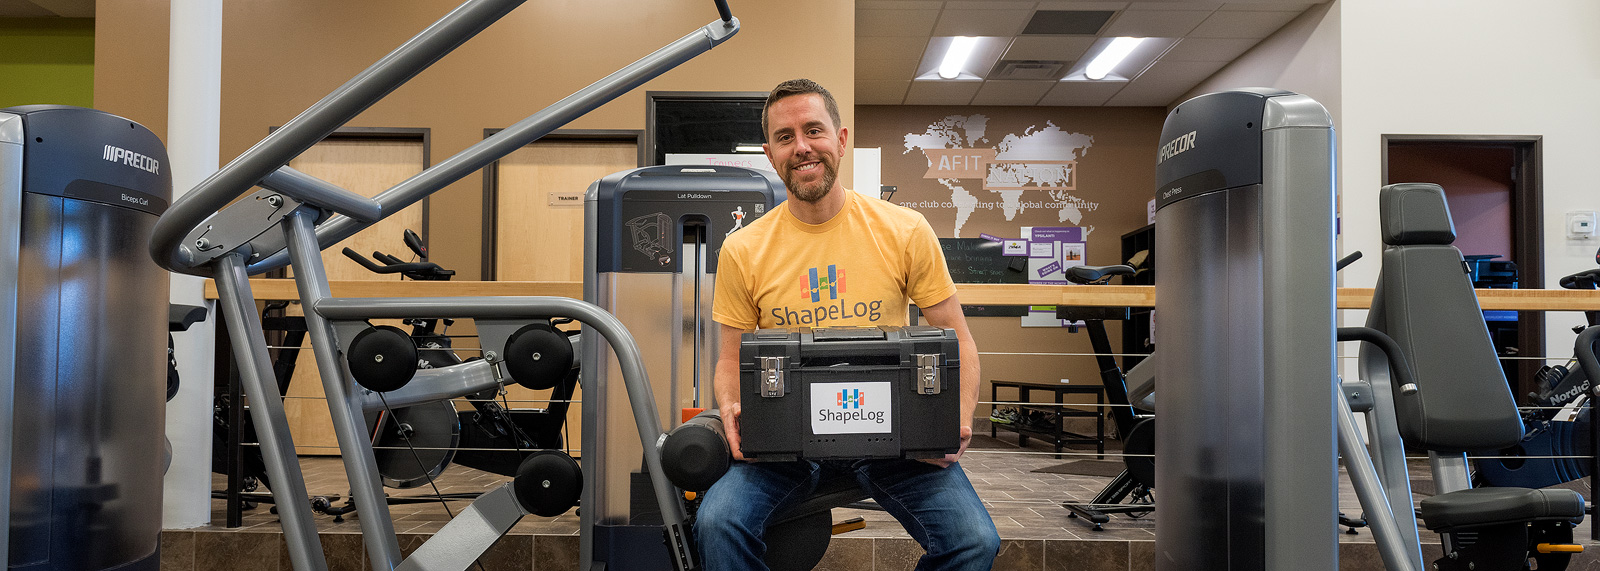 Brian Hayden of ShapeLog at Anytime Fitness in Ypsilanti